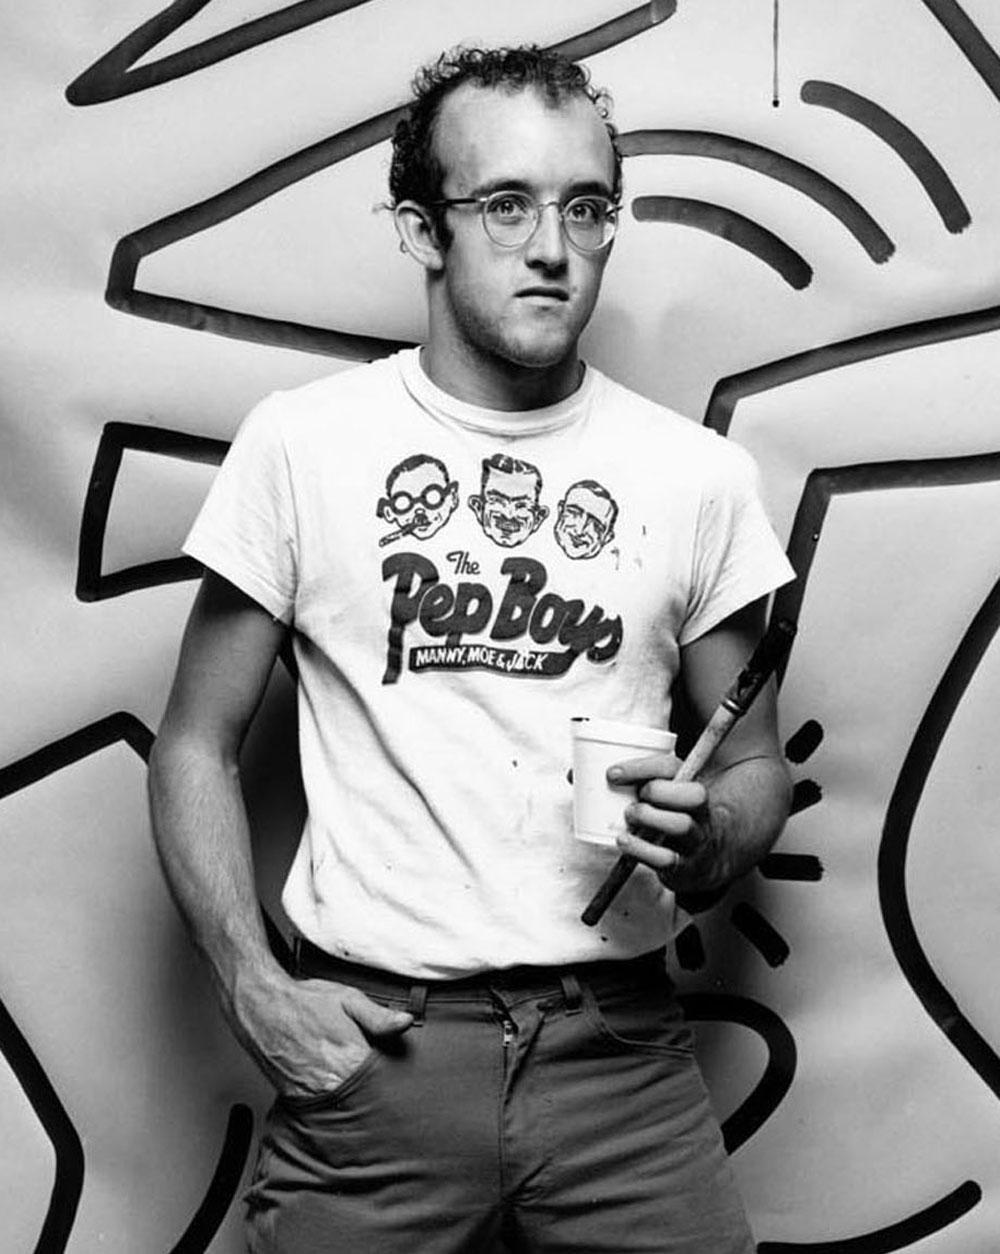  Graffiti Artist Keith Haring Studio Portrait with Just Completed Work - Photograph by Jack Mitchell